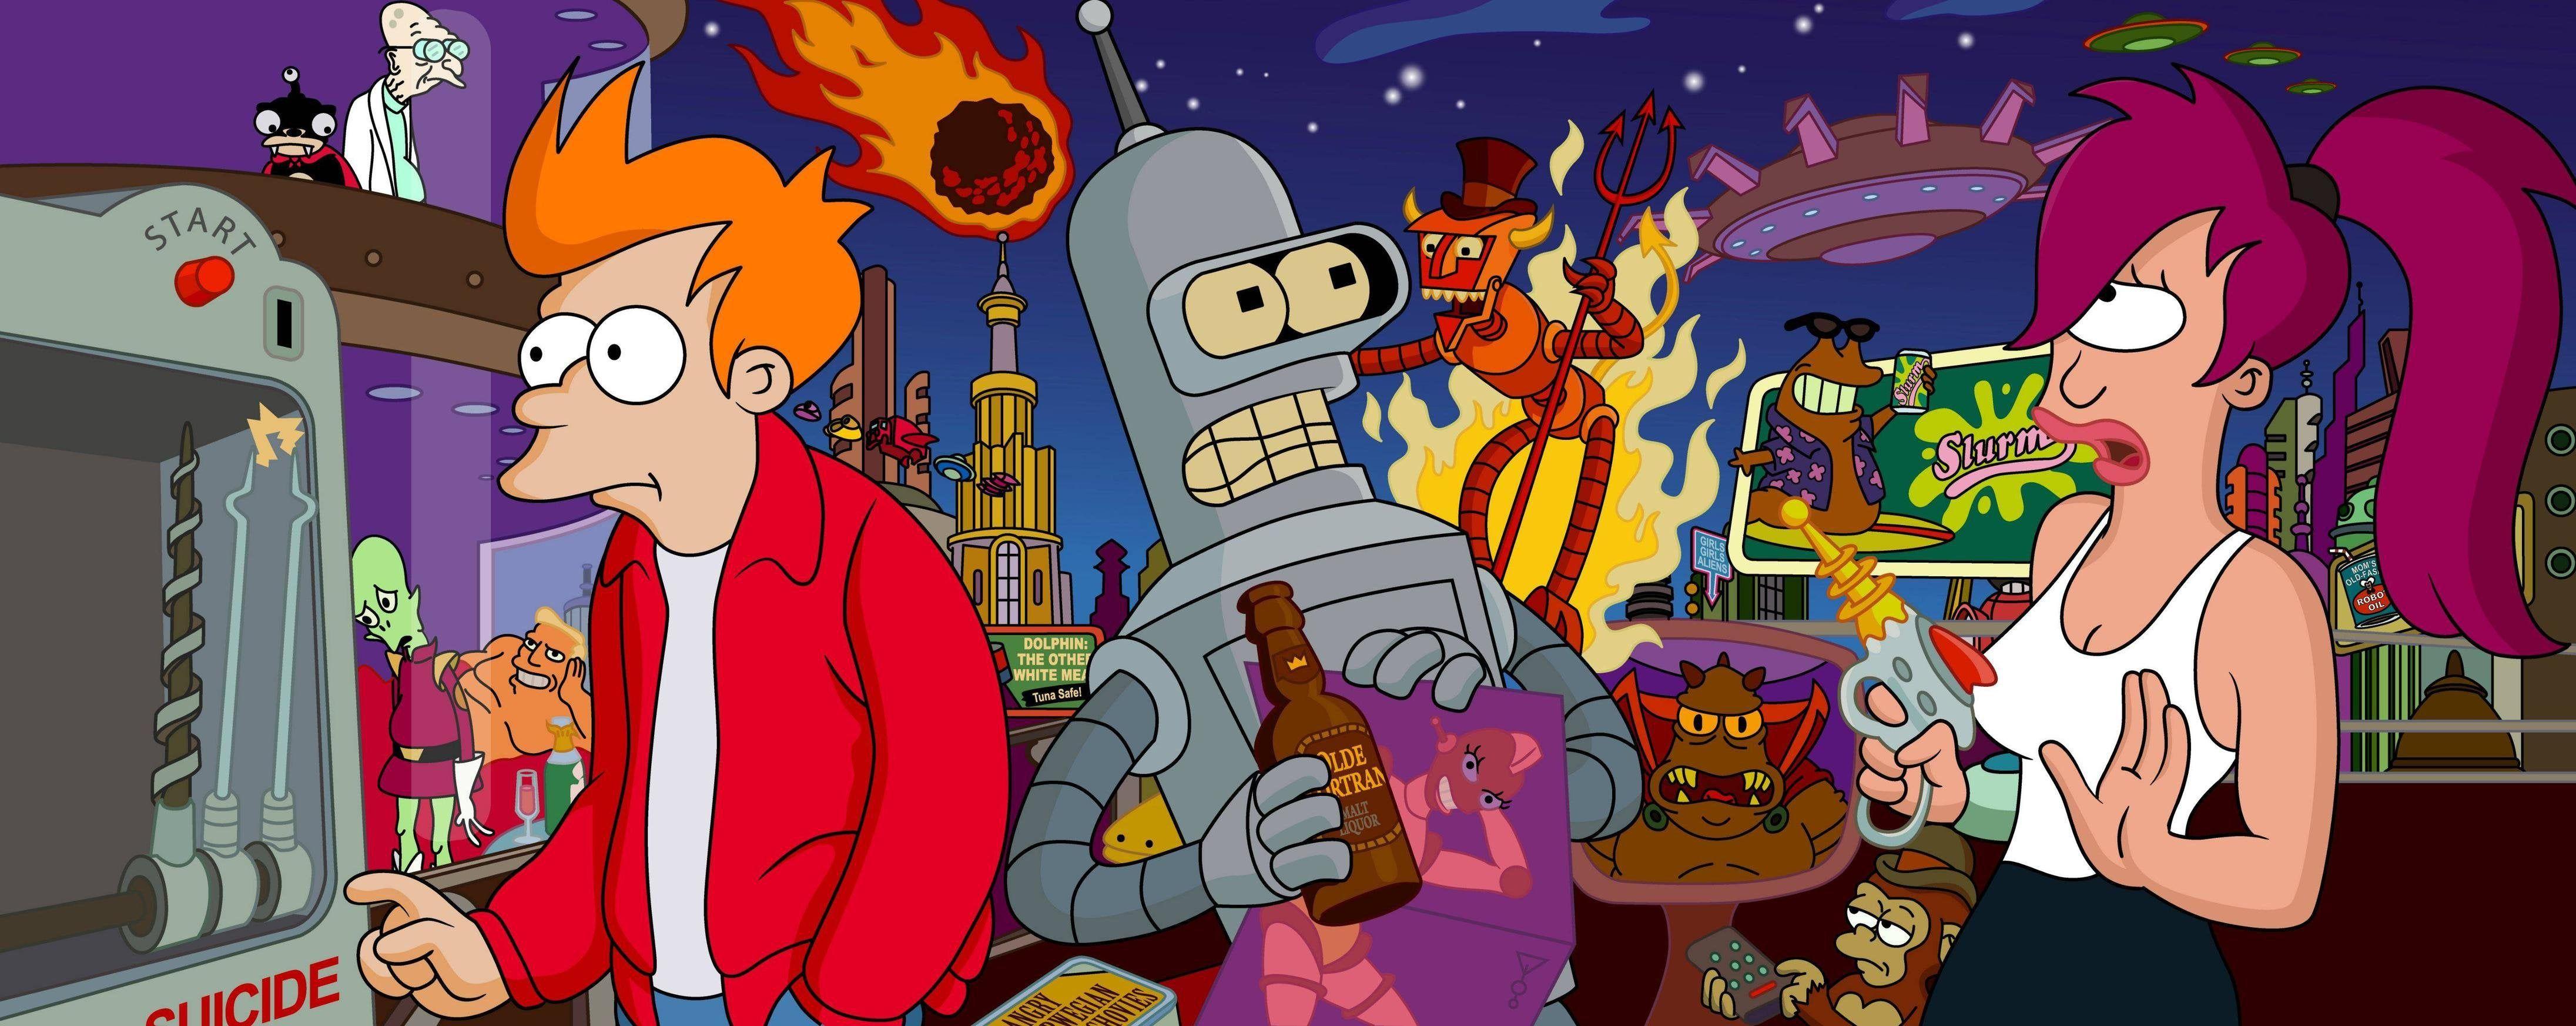 280 Futurama HD Wallpapers and Backgrounds